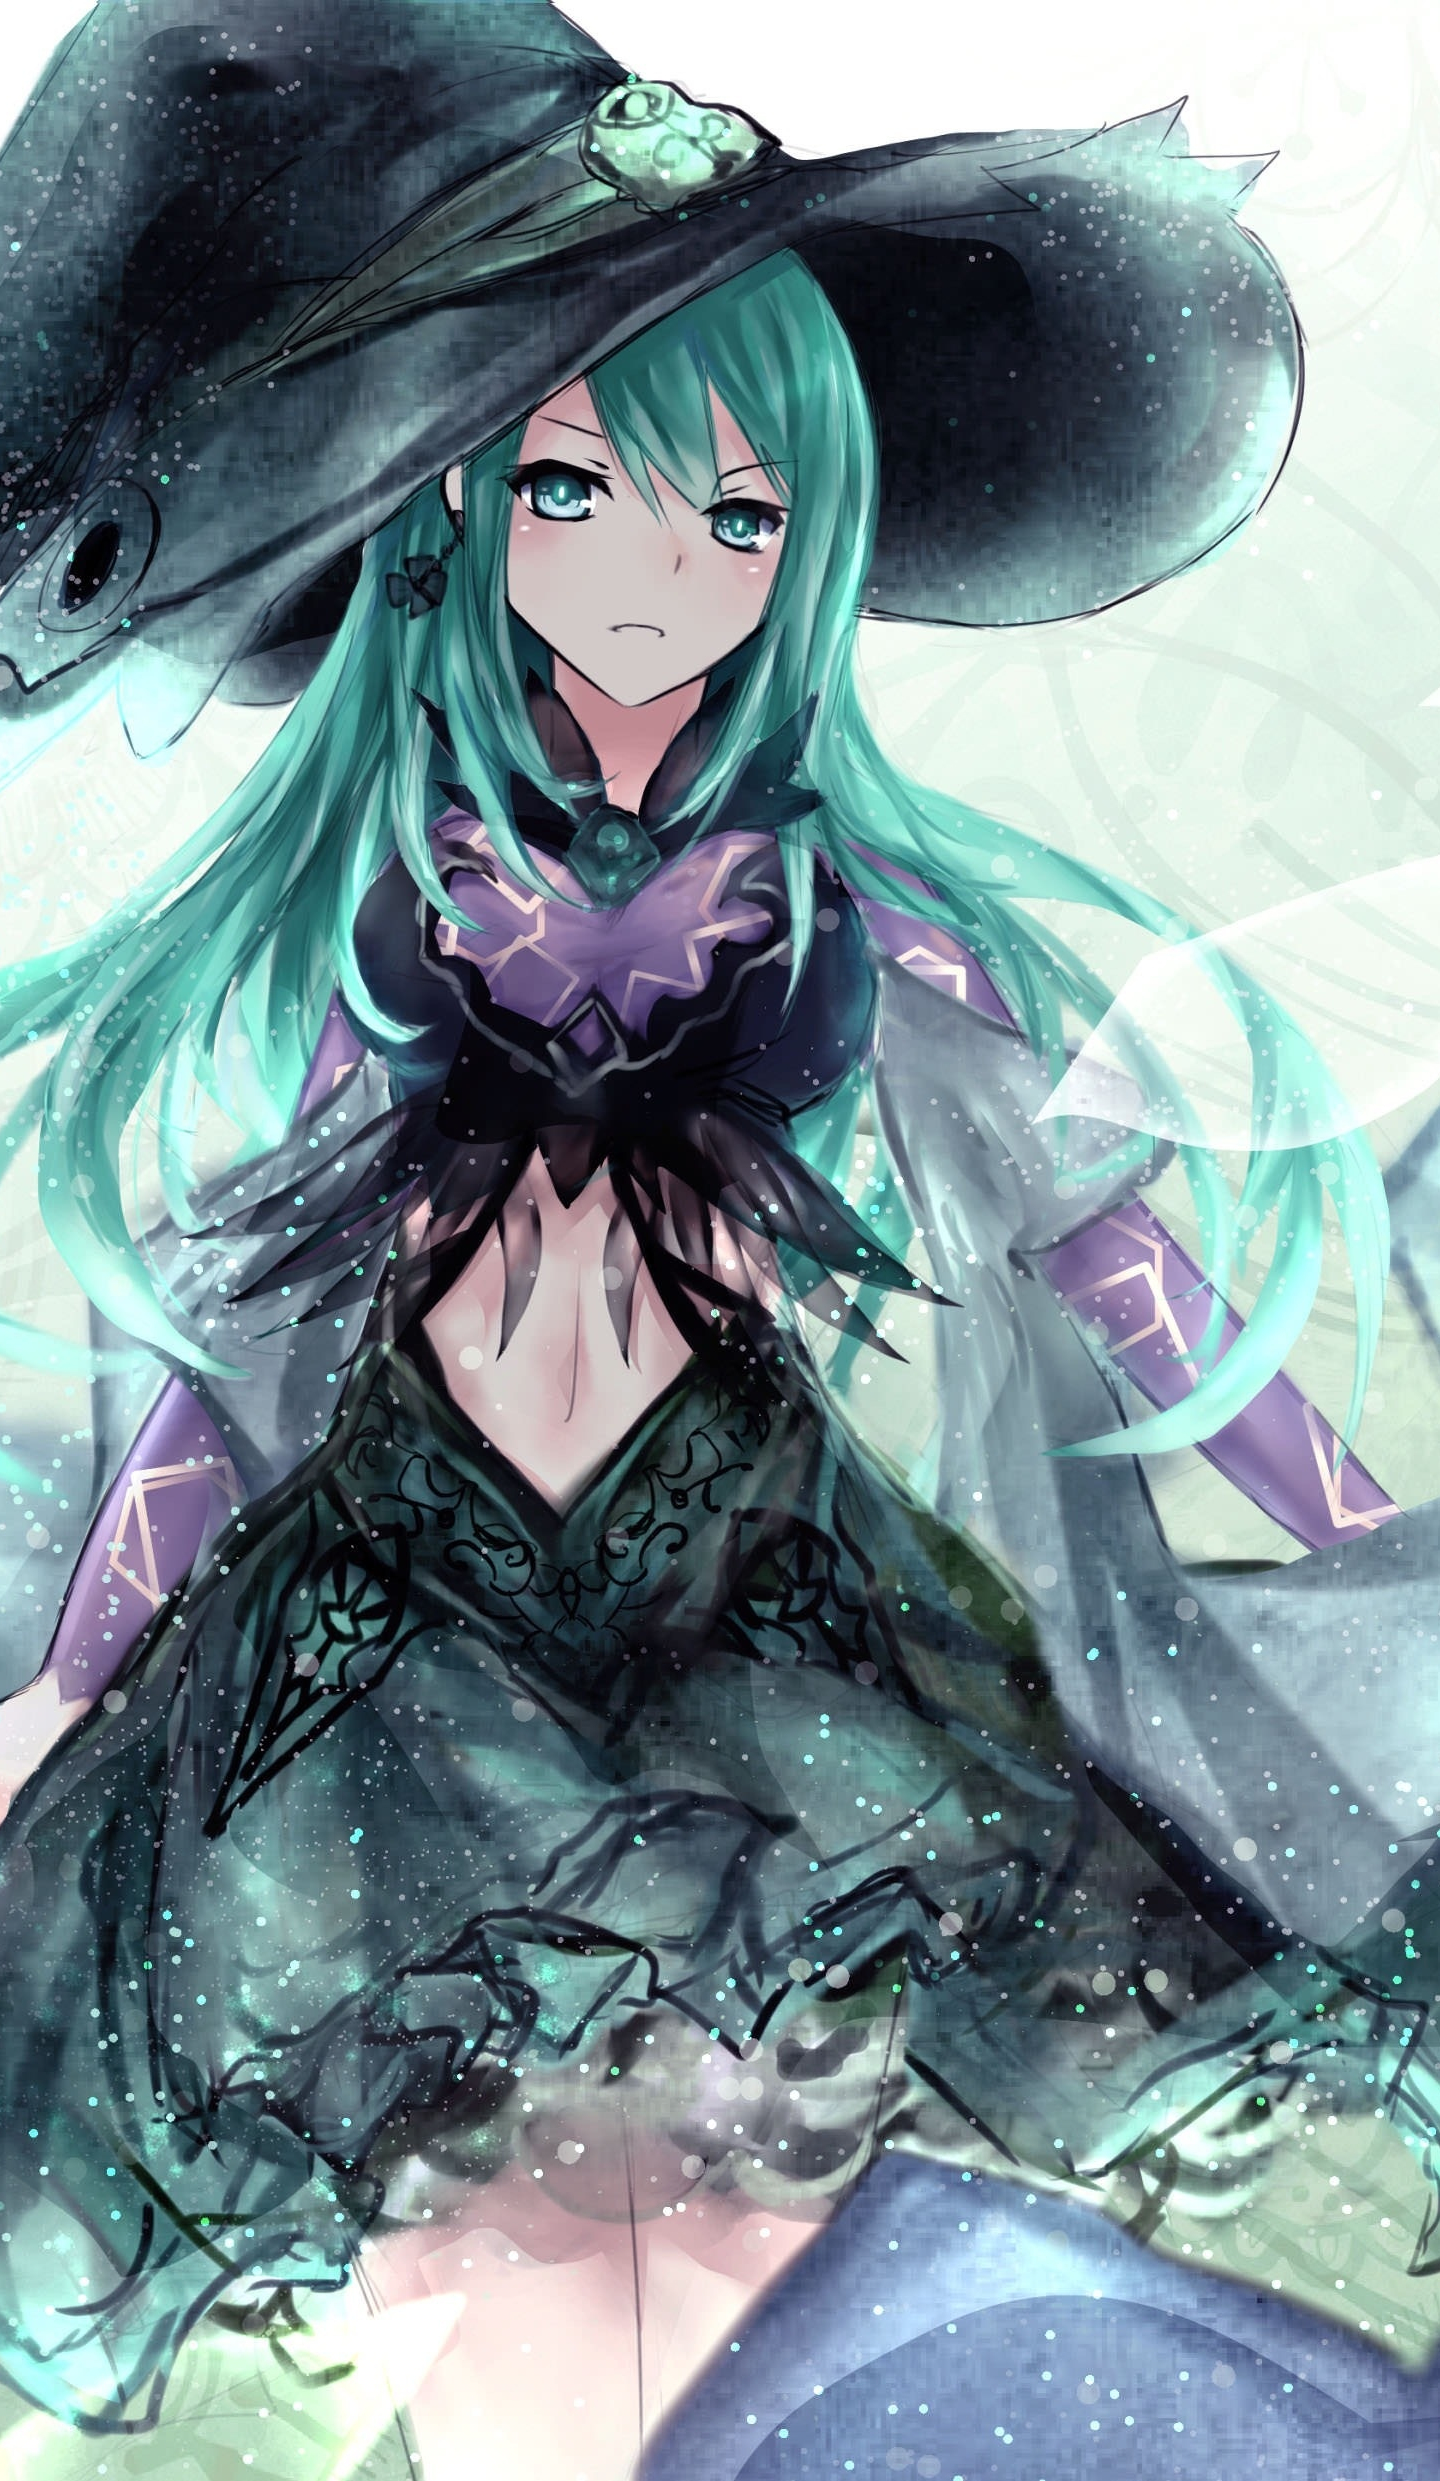 Download wallpaper 1440x2630 witch, natsumi, date a live, samsung galaxy note  8, 1440x2630 hd background, 4040